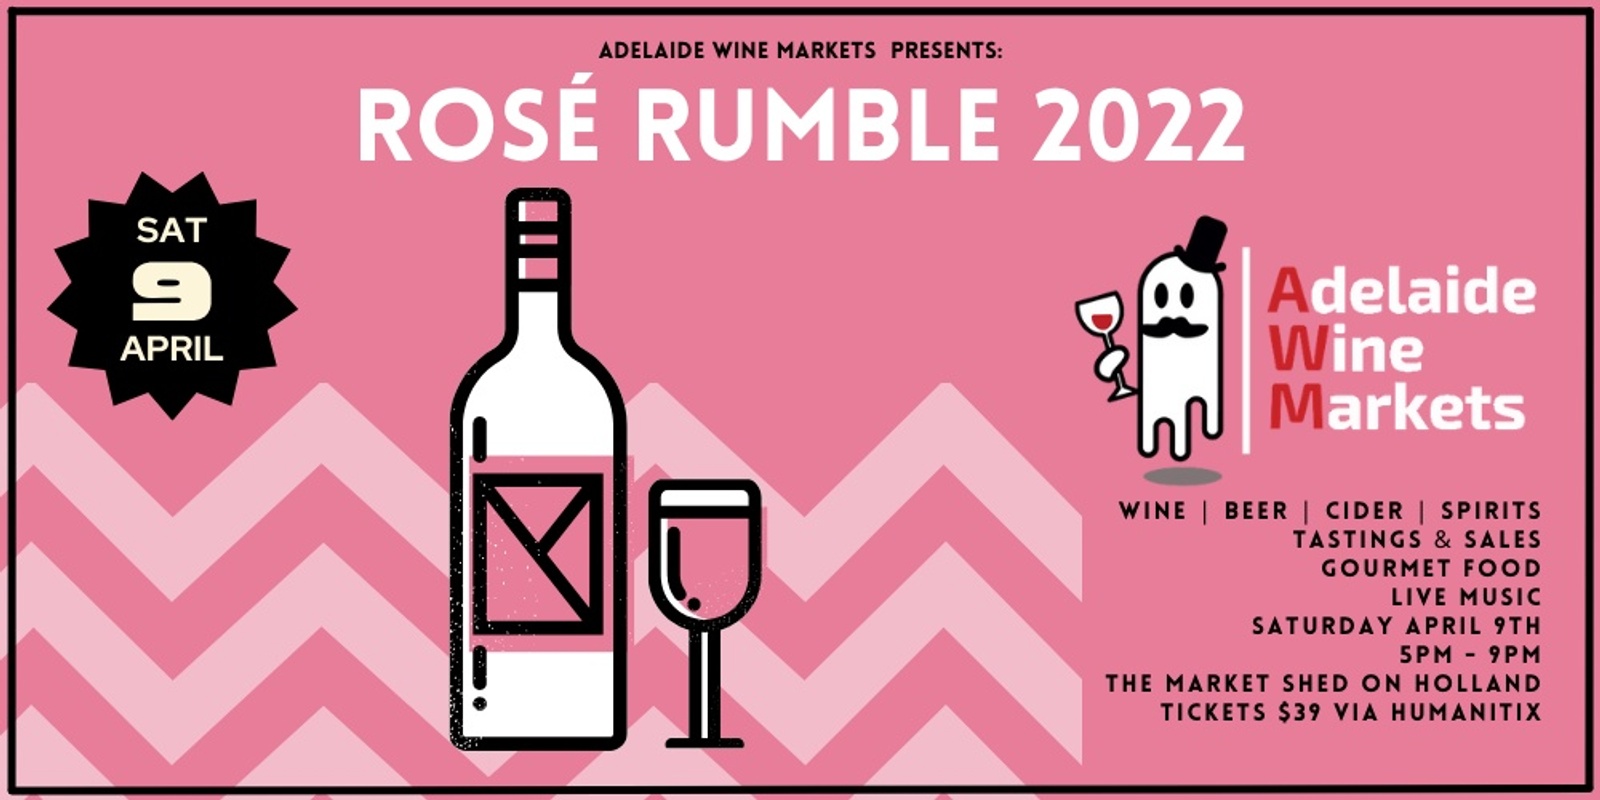 Banner image for Adelaide Wine Markets - Rosé Rumble 2022 